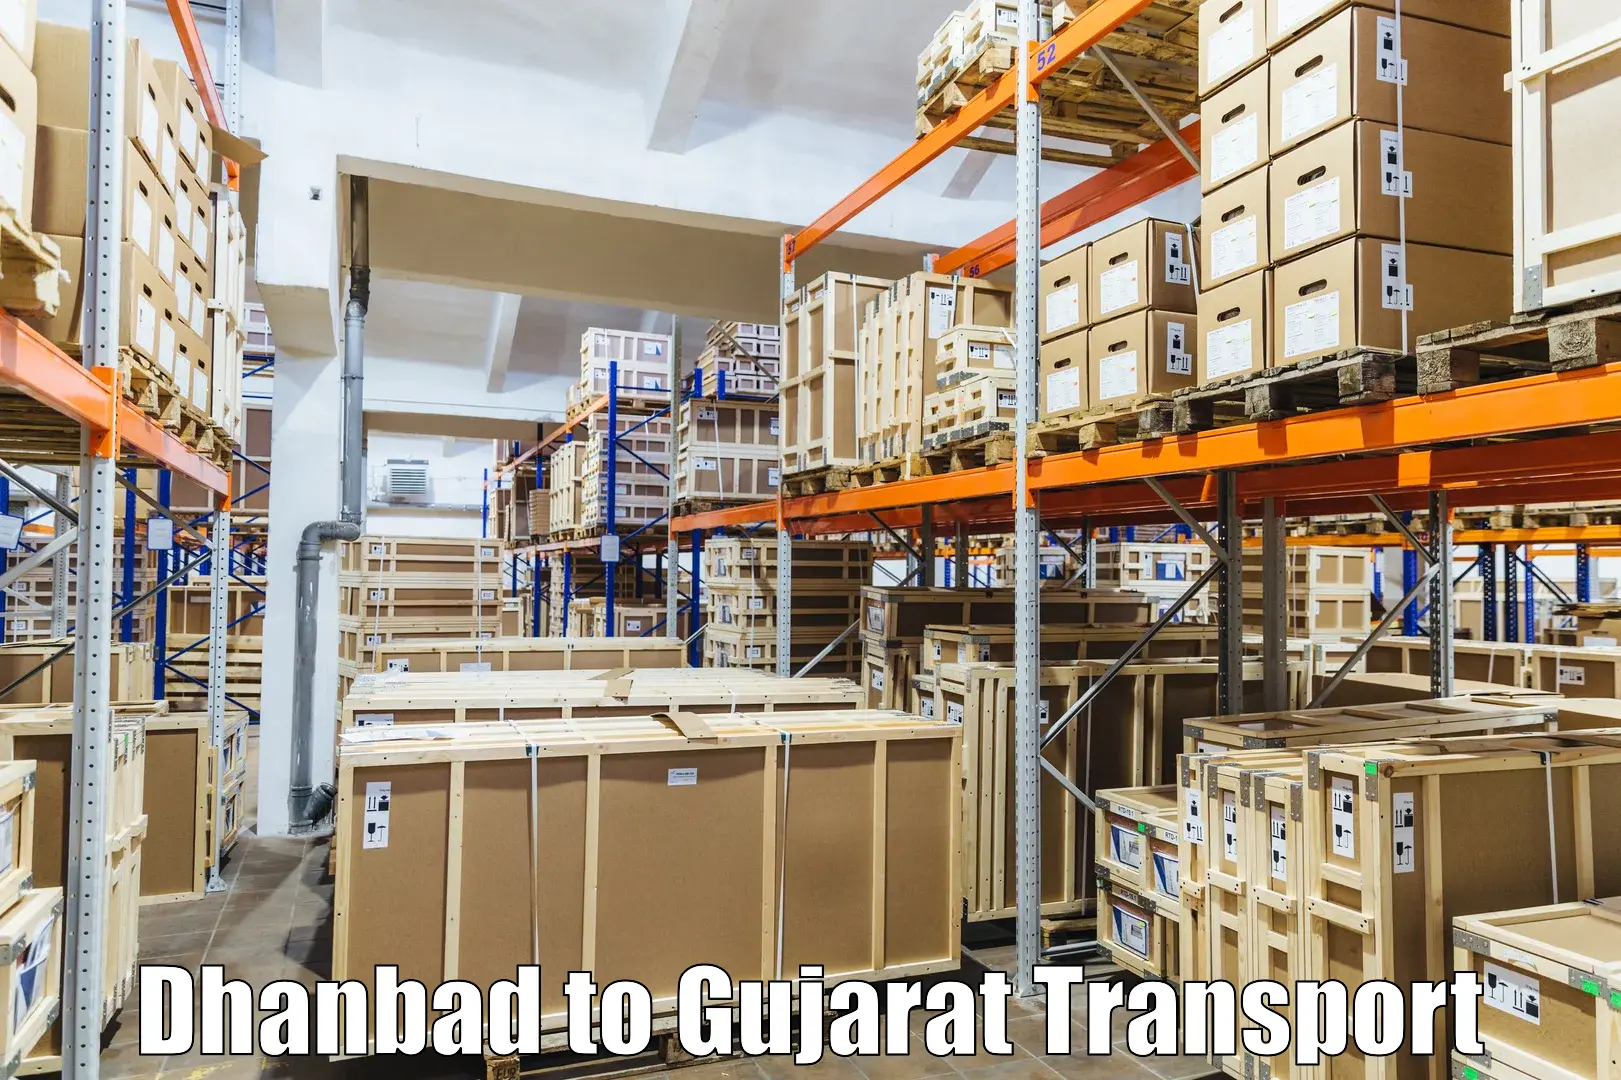 Truck transport companies in India Dhanbad to Chotila